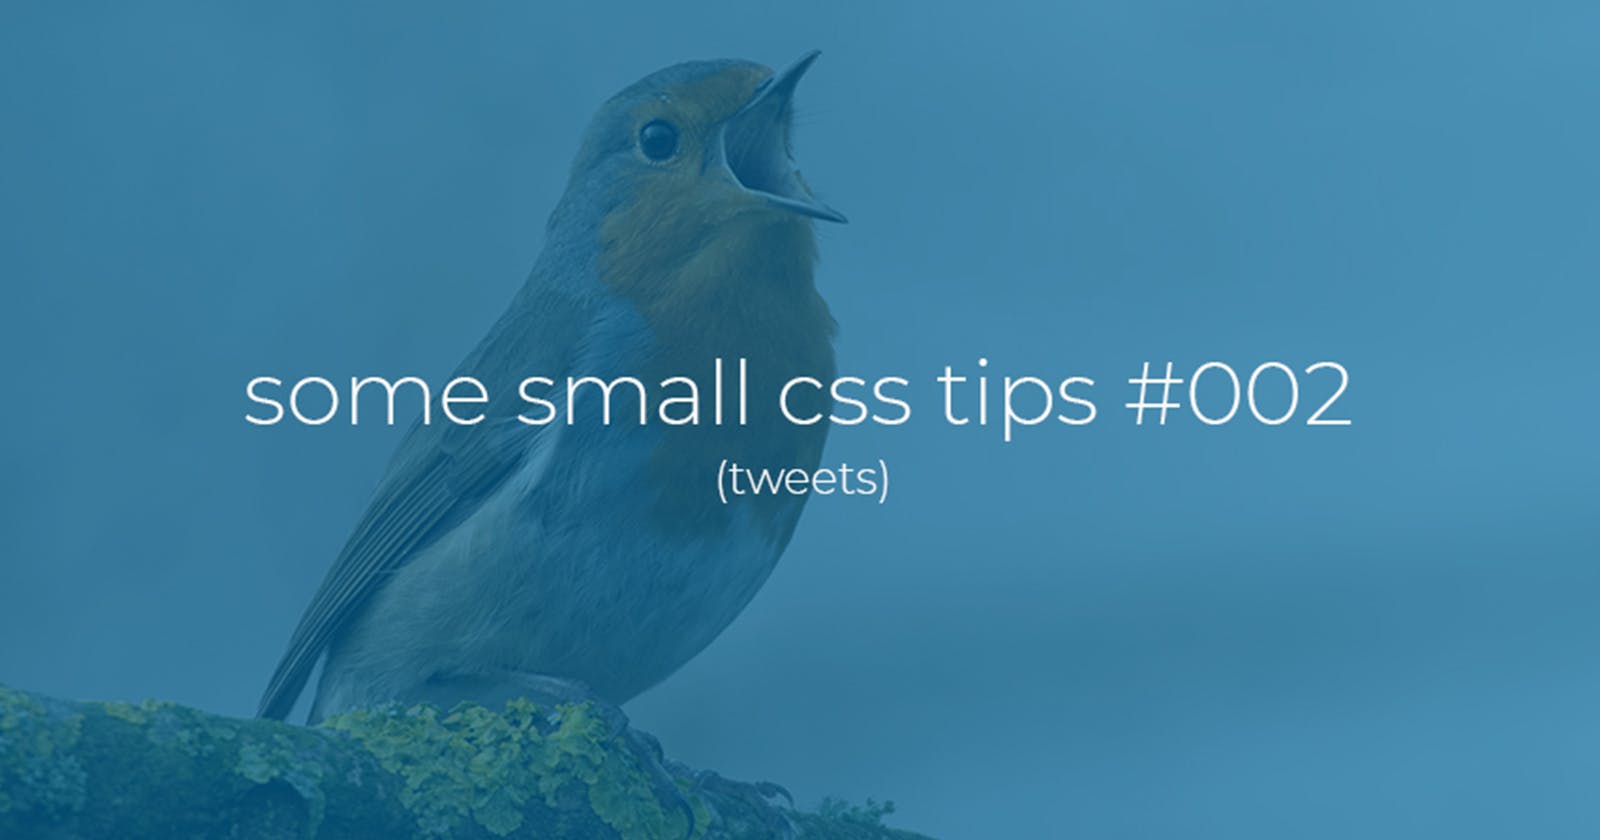 Some small css tips #002